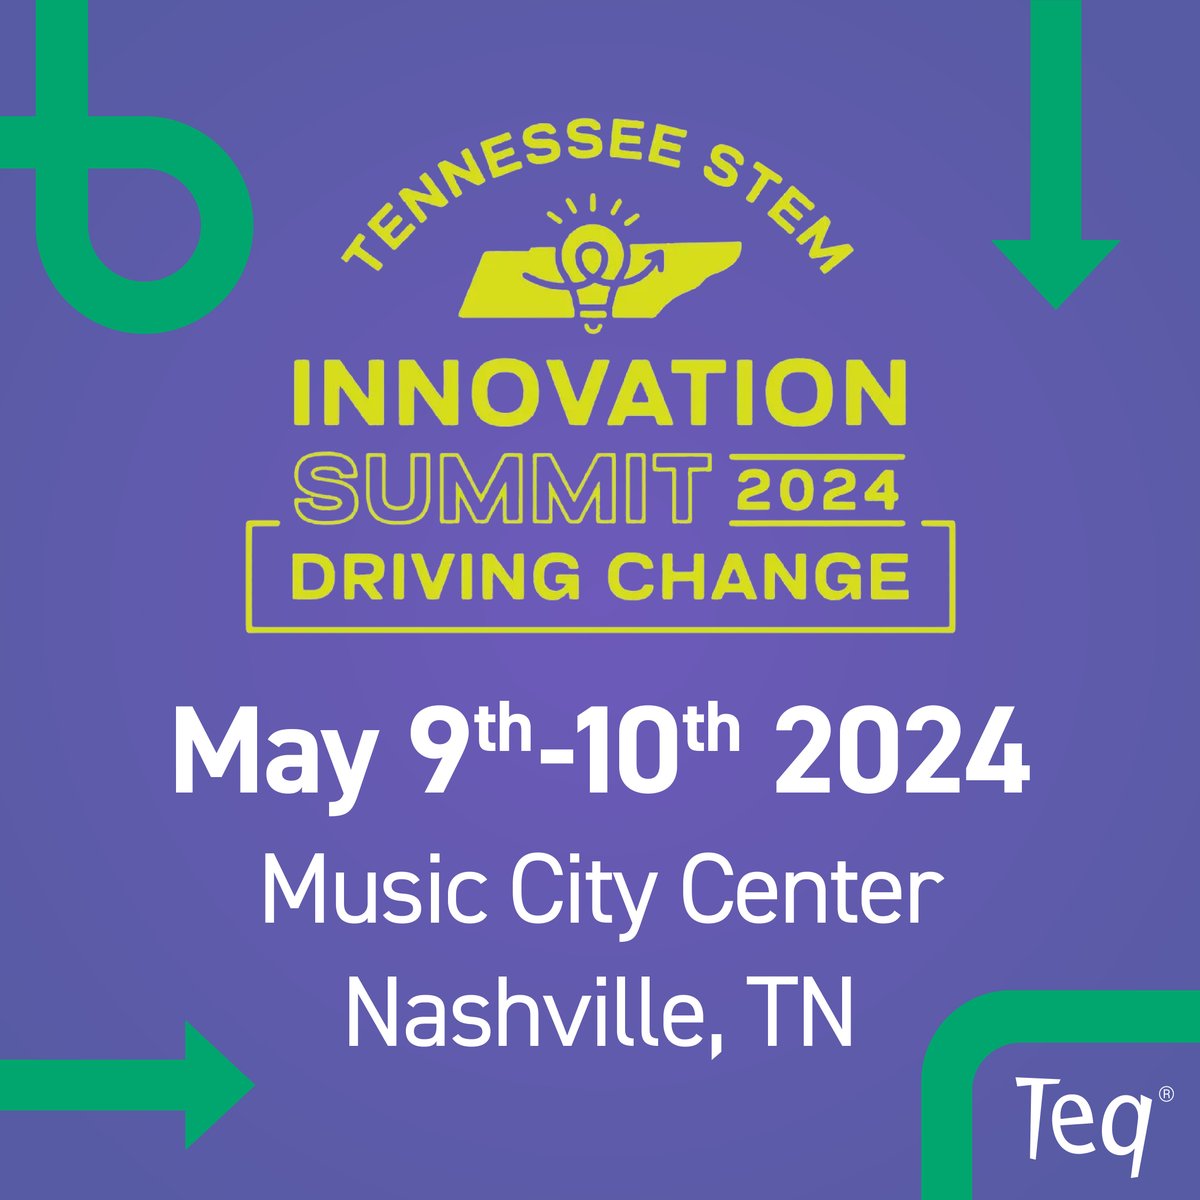 Hey, Nashille! We'll be at the 2024 Tennessee STEM Innovation Summit from May 9-10 at Music City Center! We can't wait to meet fellow educators and innovators to discuss the future of STEM! #edchat #edtech #TNSTEM #STEM #techconference @theTSIN